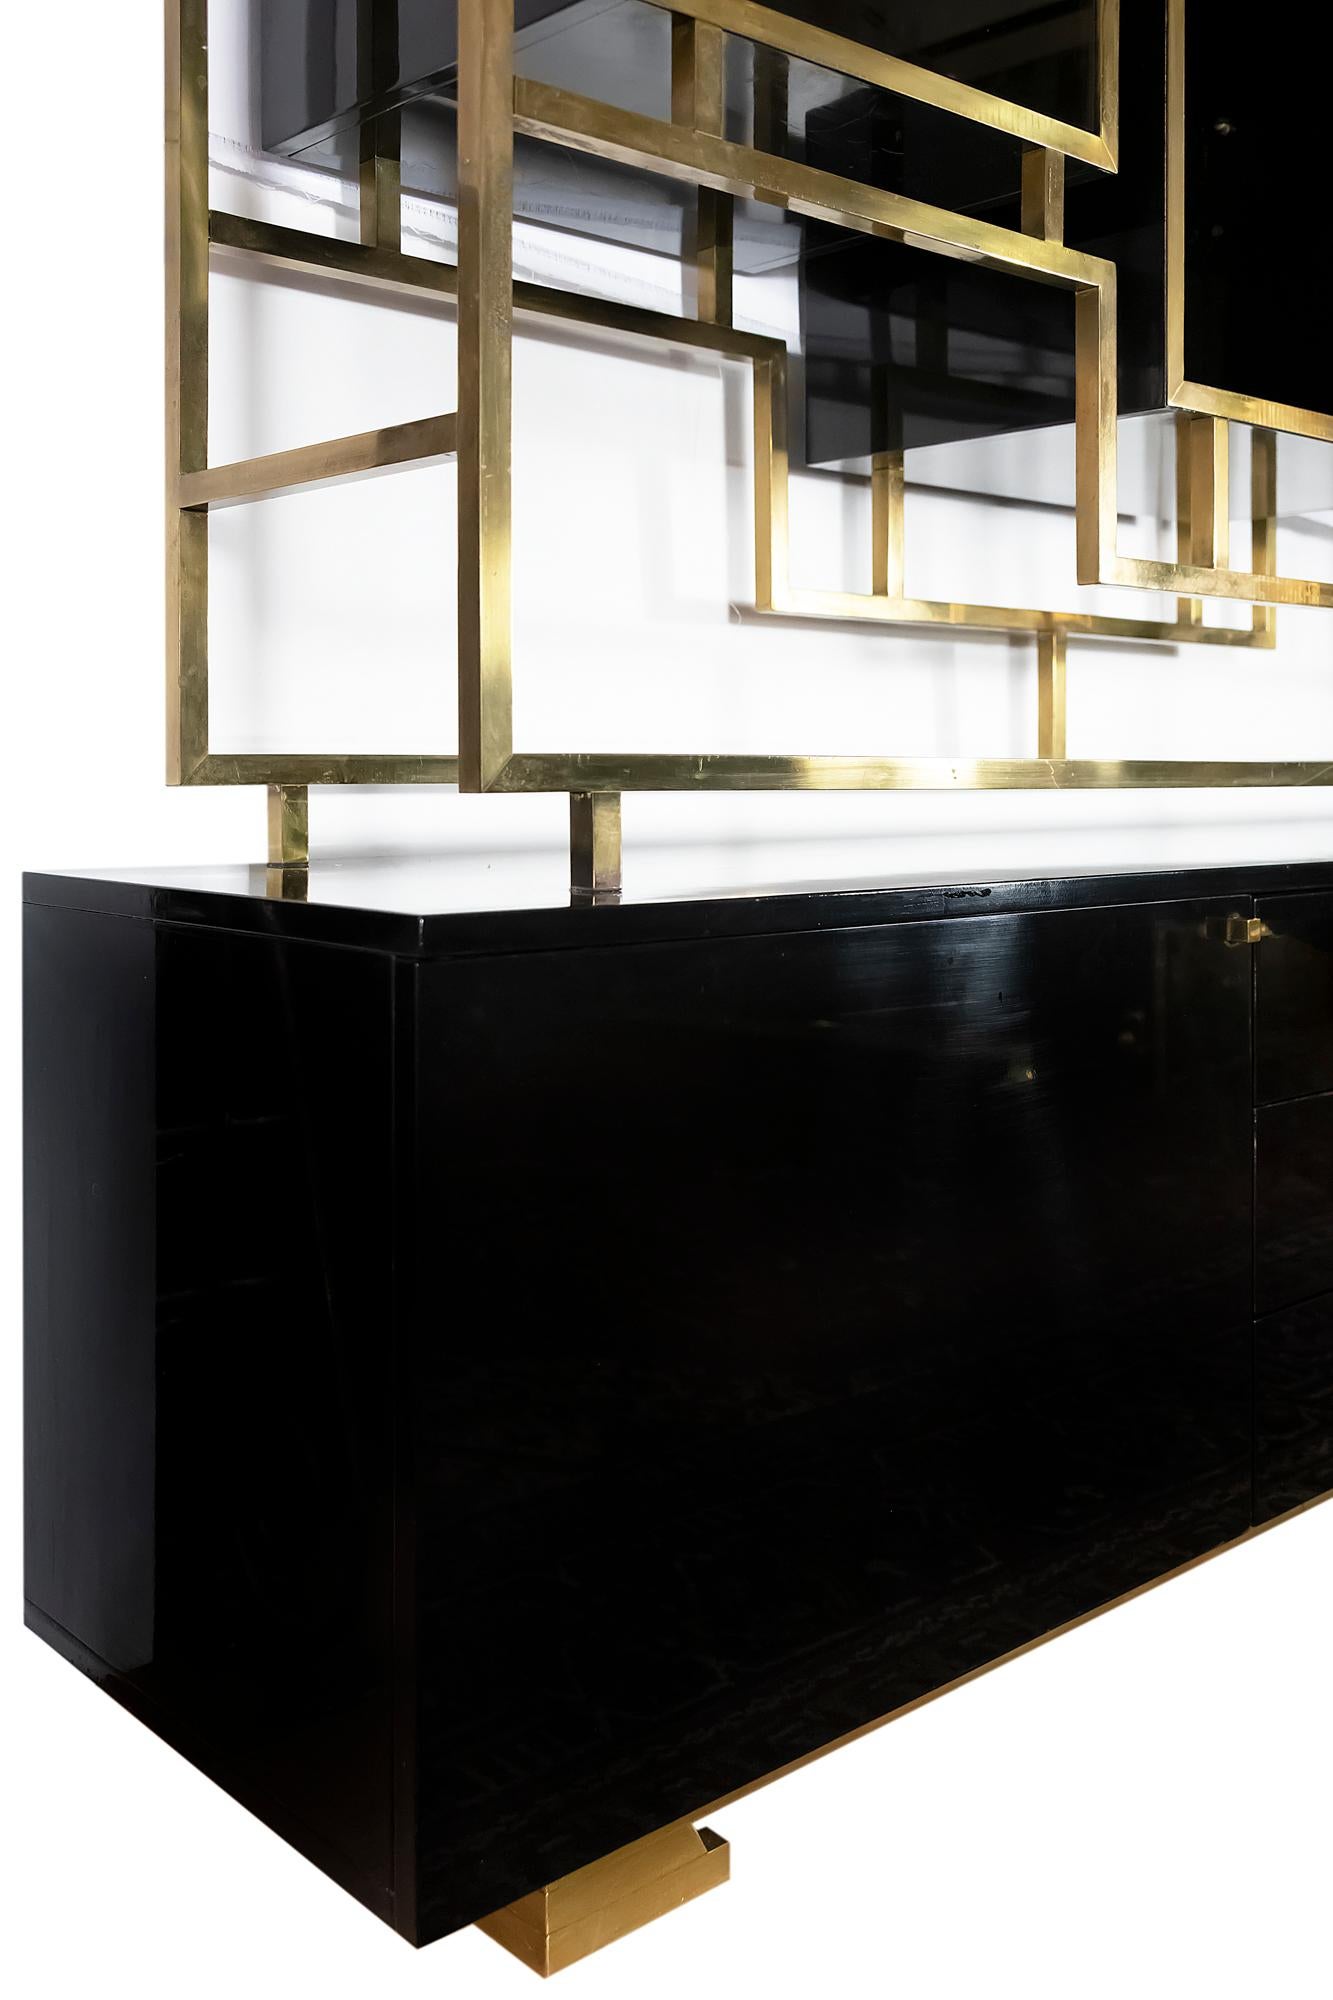 Midcentury brass étagère/sideboard/shelves by Kim Moltzer from 1970s.
This furniture consists of two parts: top structure in square brass and black lacquered wood with doors and shelves in black glass; bottom sideboard is on brass legs and in black